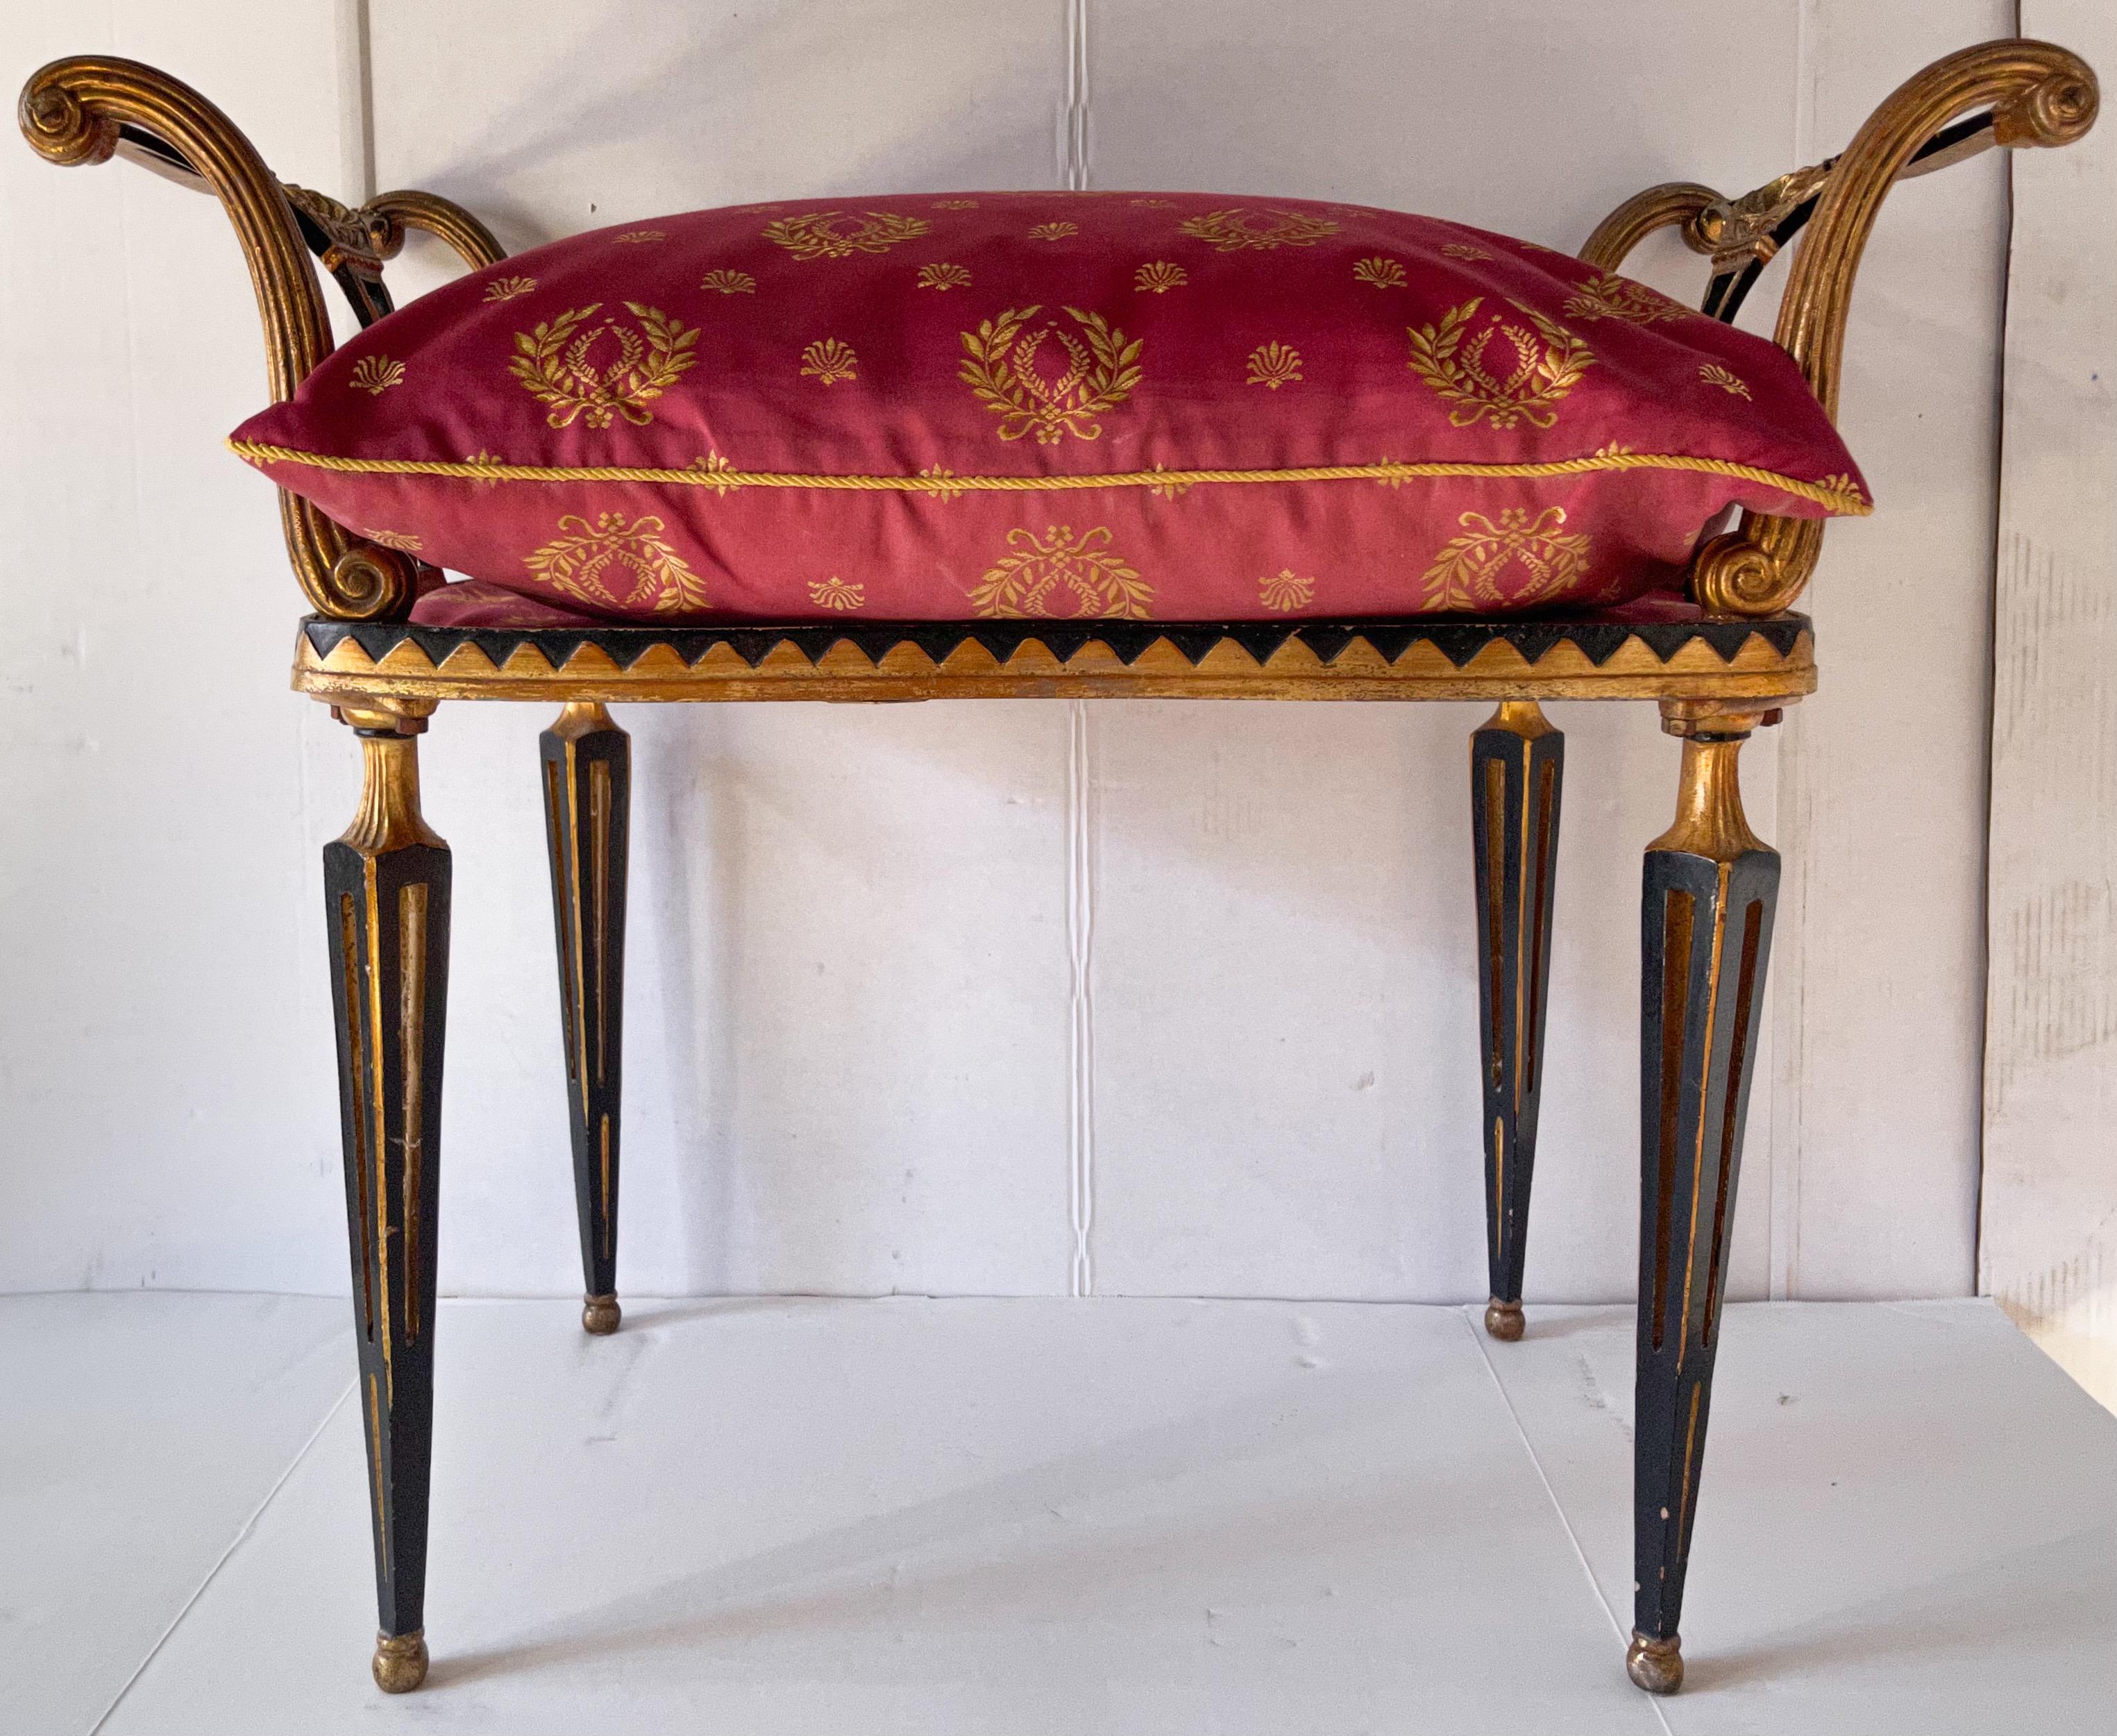 This is 1950s Italian regency style gilt metal tole painted bench in vintage embroidered French silk. It is special piece! It is unmarked and in very good condition. The pillow, however, is very faded on one side.